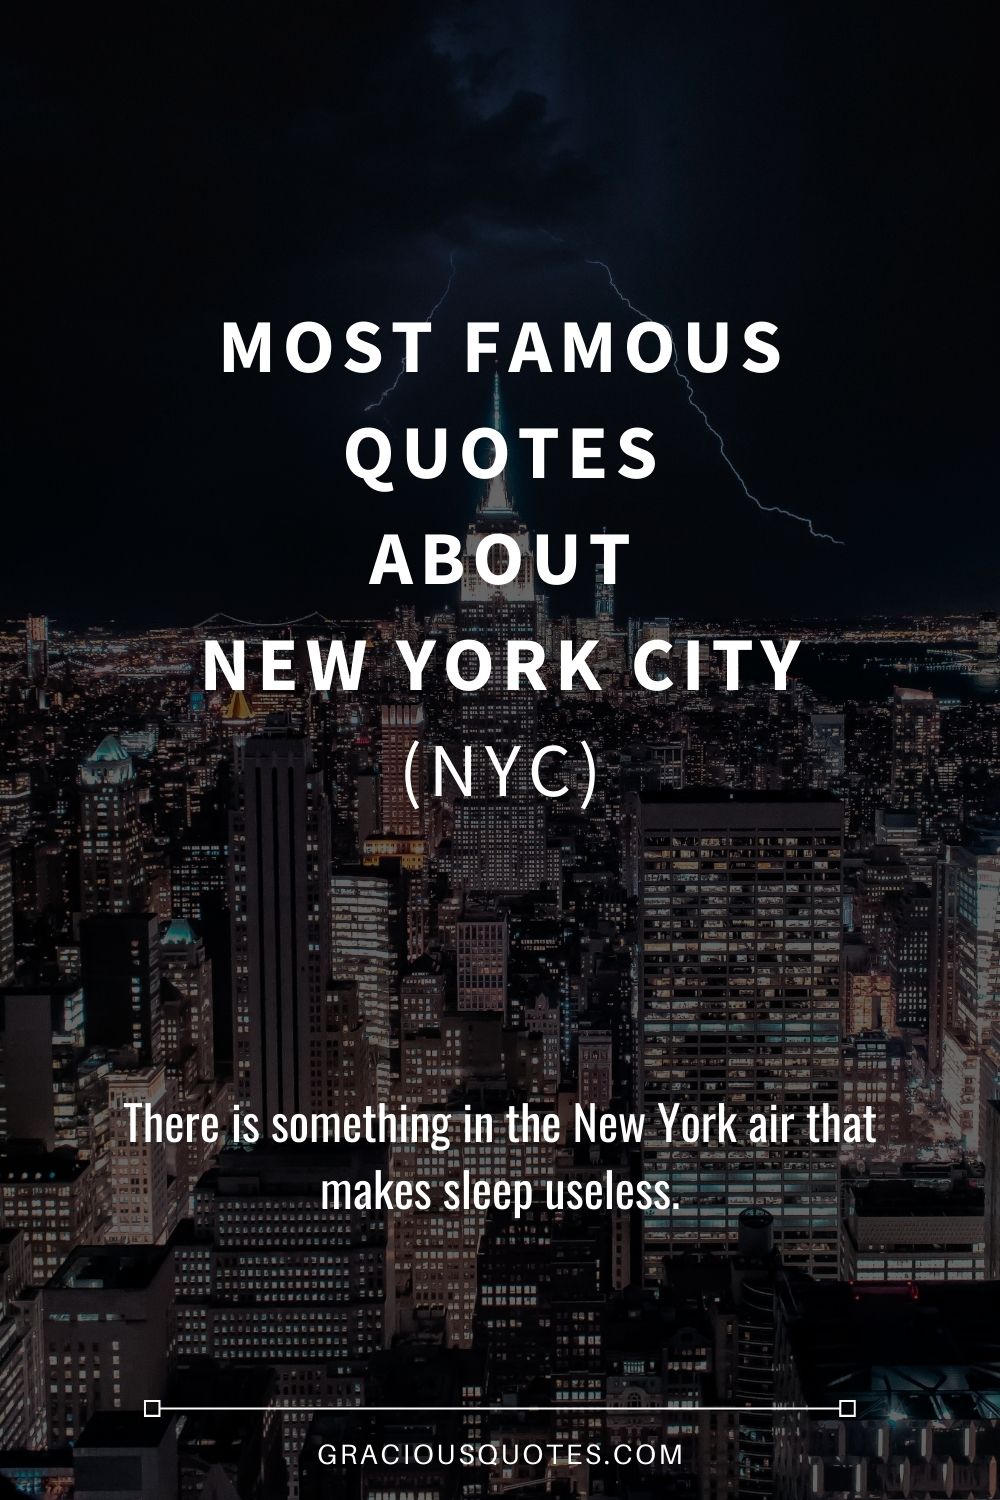 Most Famous Quotes About New York City (NYC) - Gracious Quotes